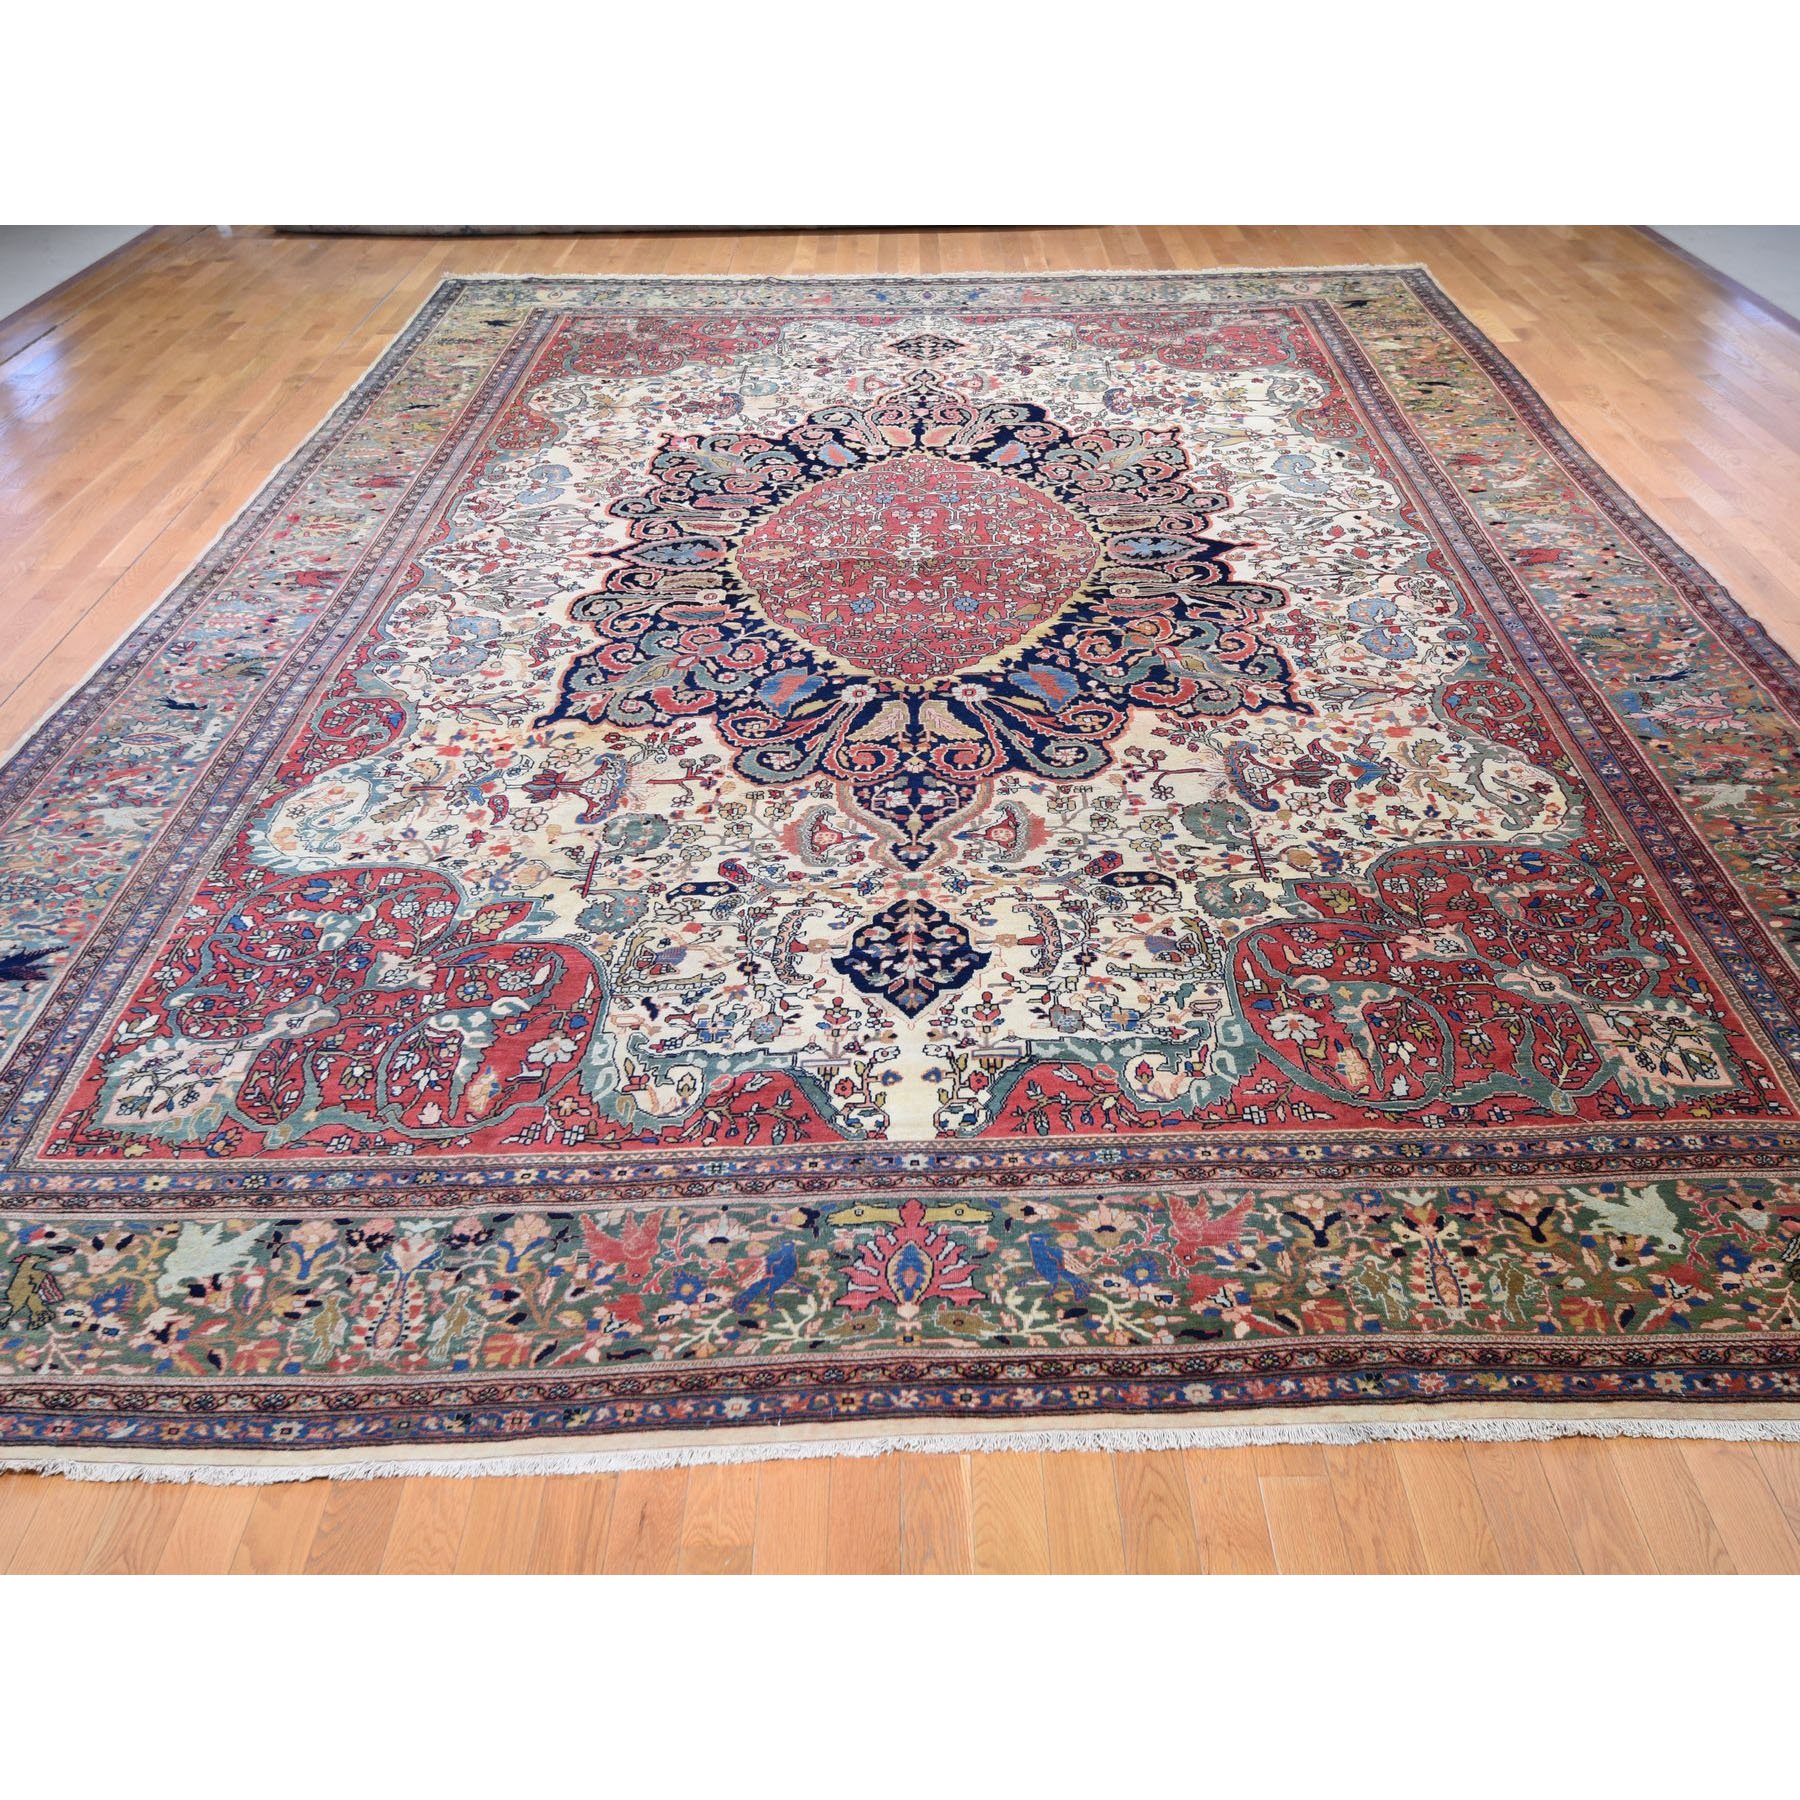 12-2 x18-8  Oversized Antique Persian Sarouk Fereghan With Birds Full Pile And Soft Hand Knotted Oriental Rug 